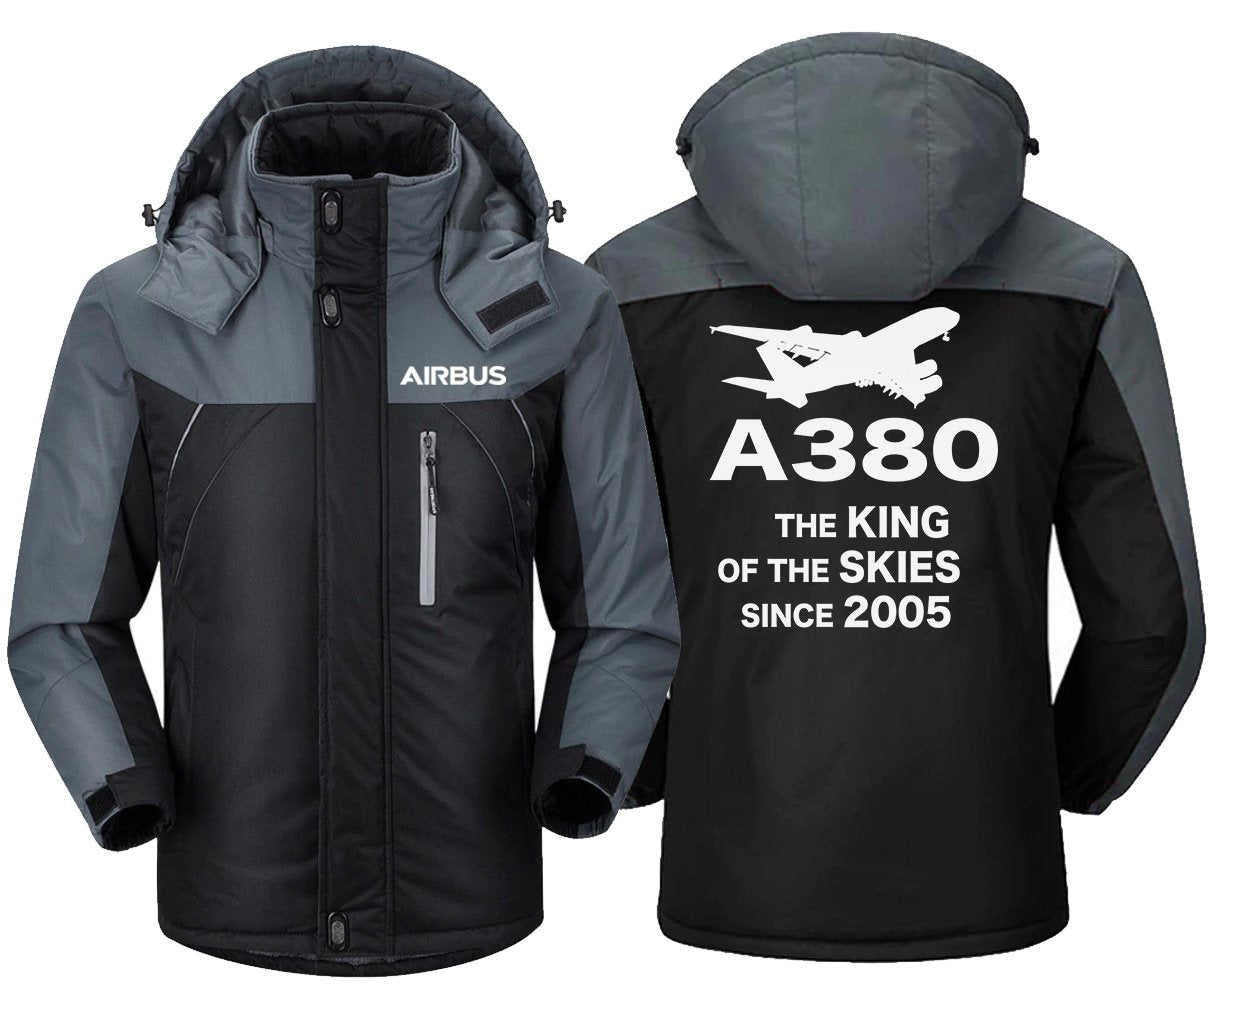 AIRBUS A380 THE KING OF THE SKIES SINCE 2005 DESIGNED WINDBREAKER THE AV8R